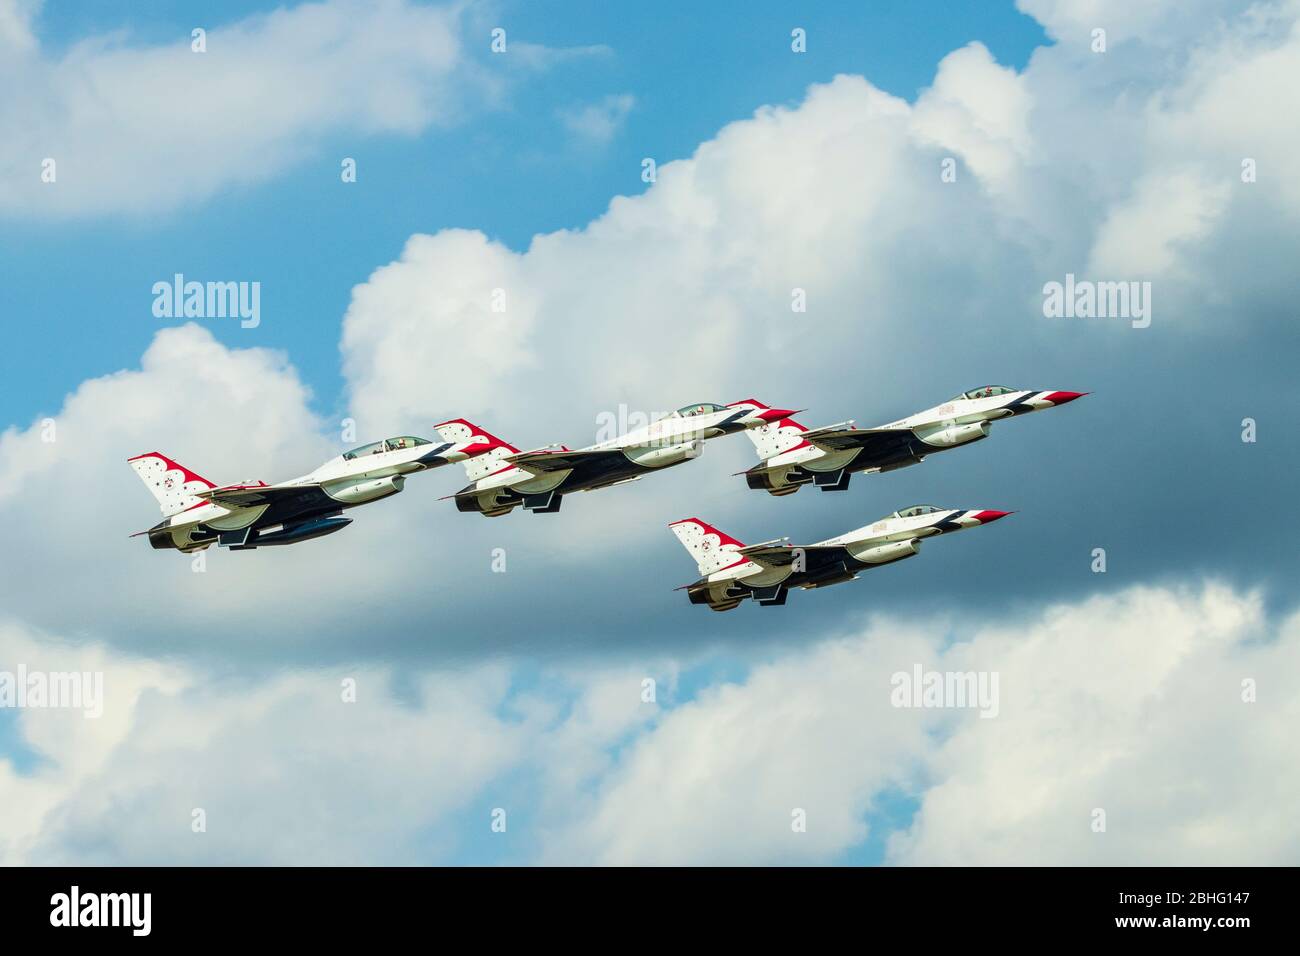 US Air Force Thunderbirds precision flying team performing at 2019 Wings Over Houston at Ellington Field in Houston, Texas. Stock Photo